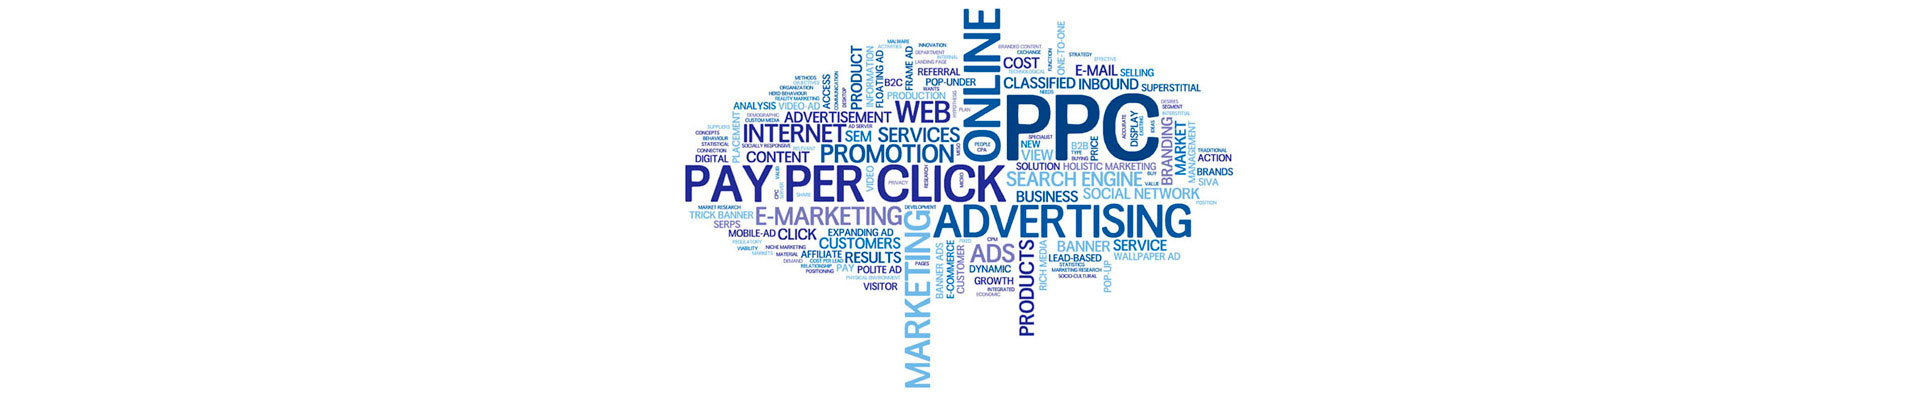 Campagne PayPerClick